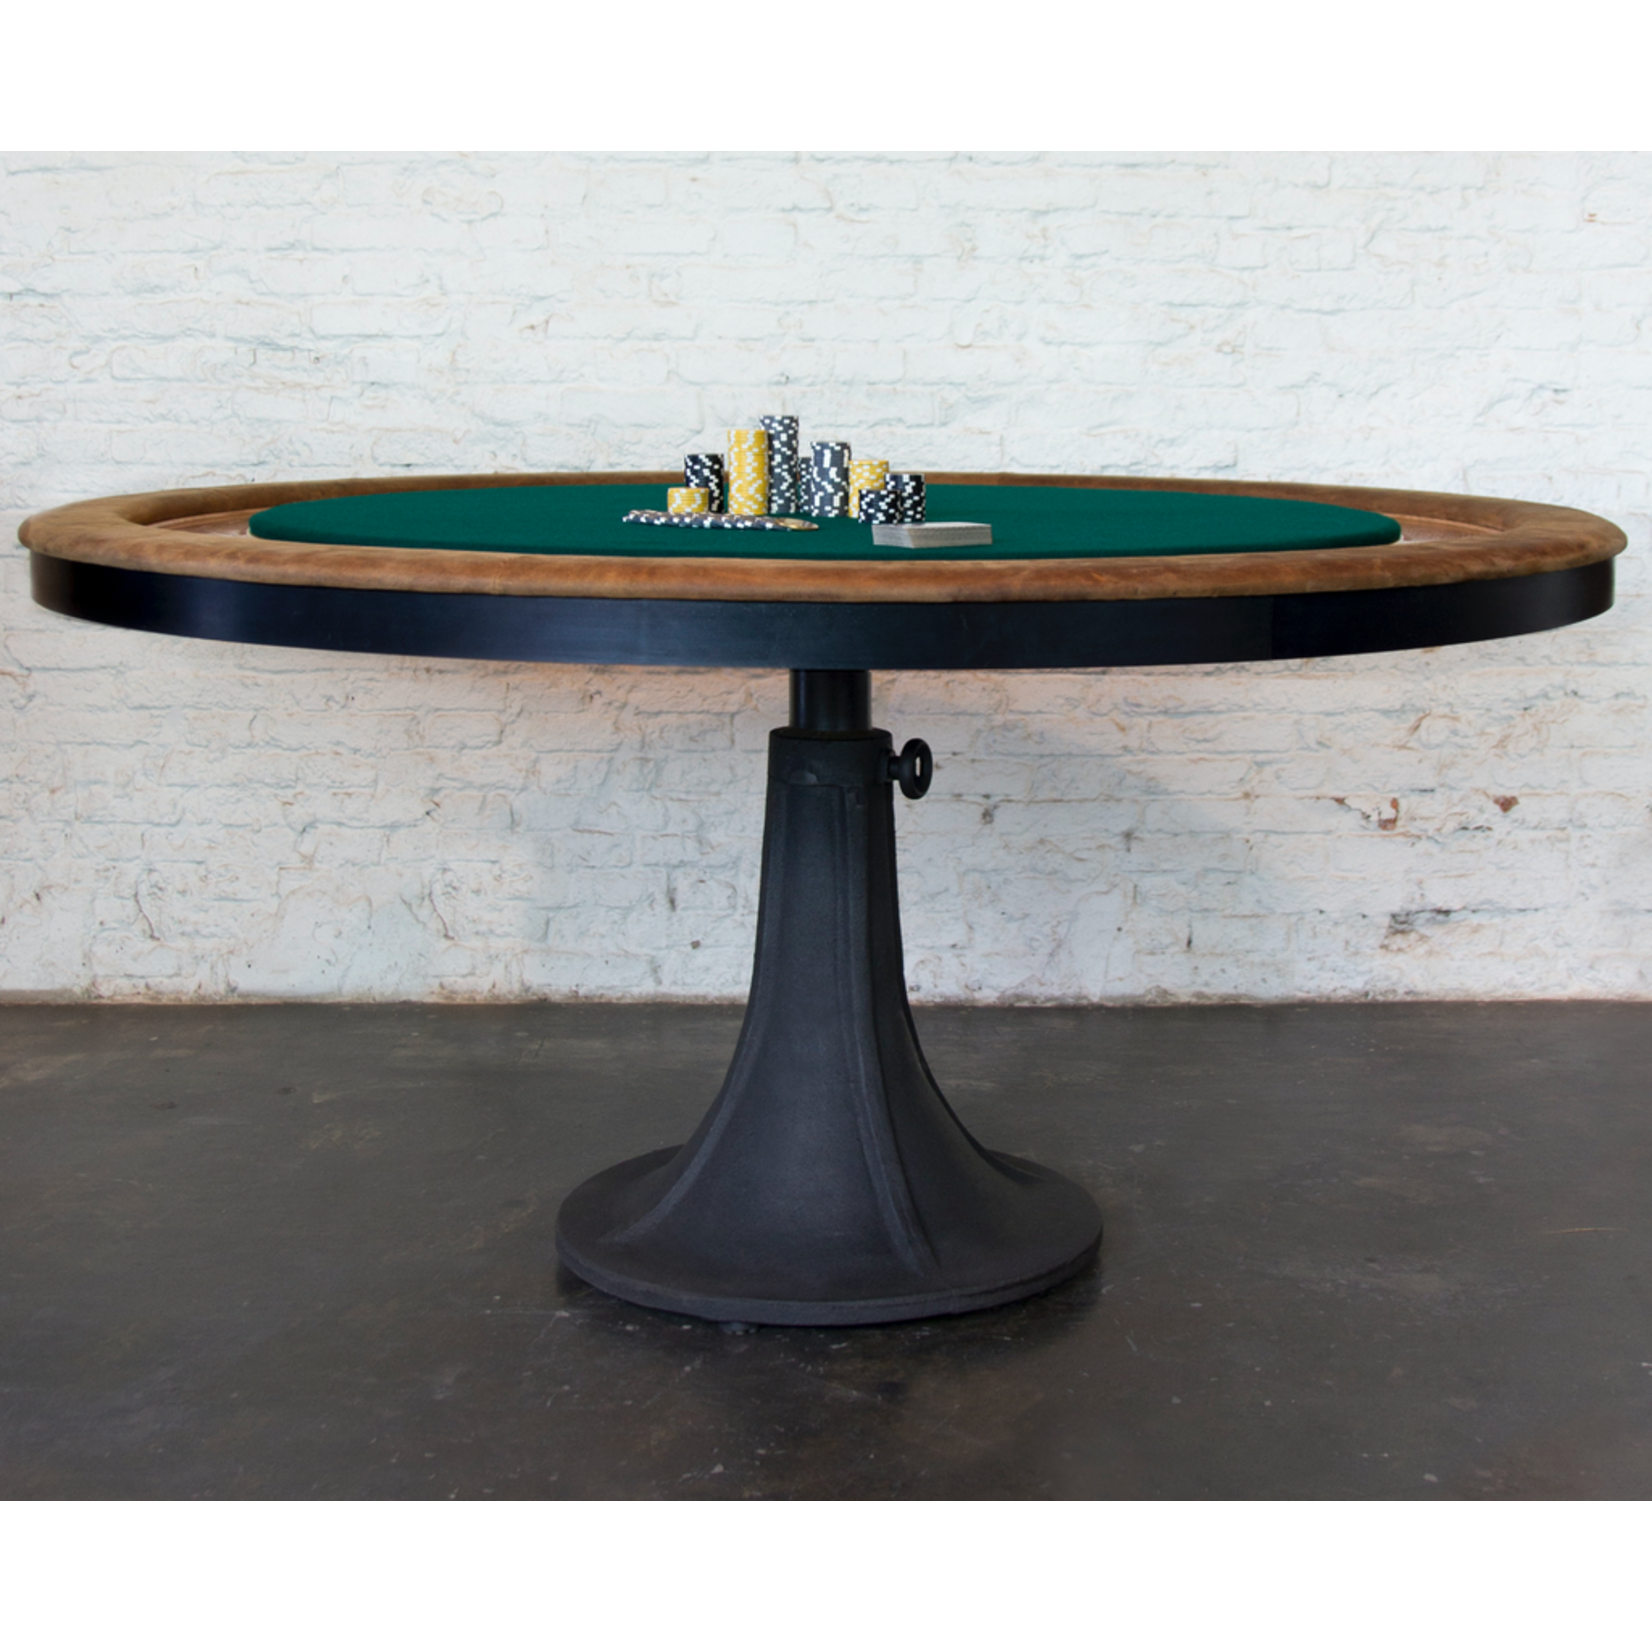 DISTRICT EIGHT POKER TABLE